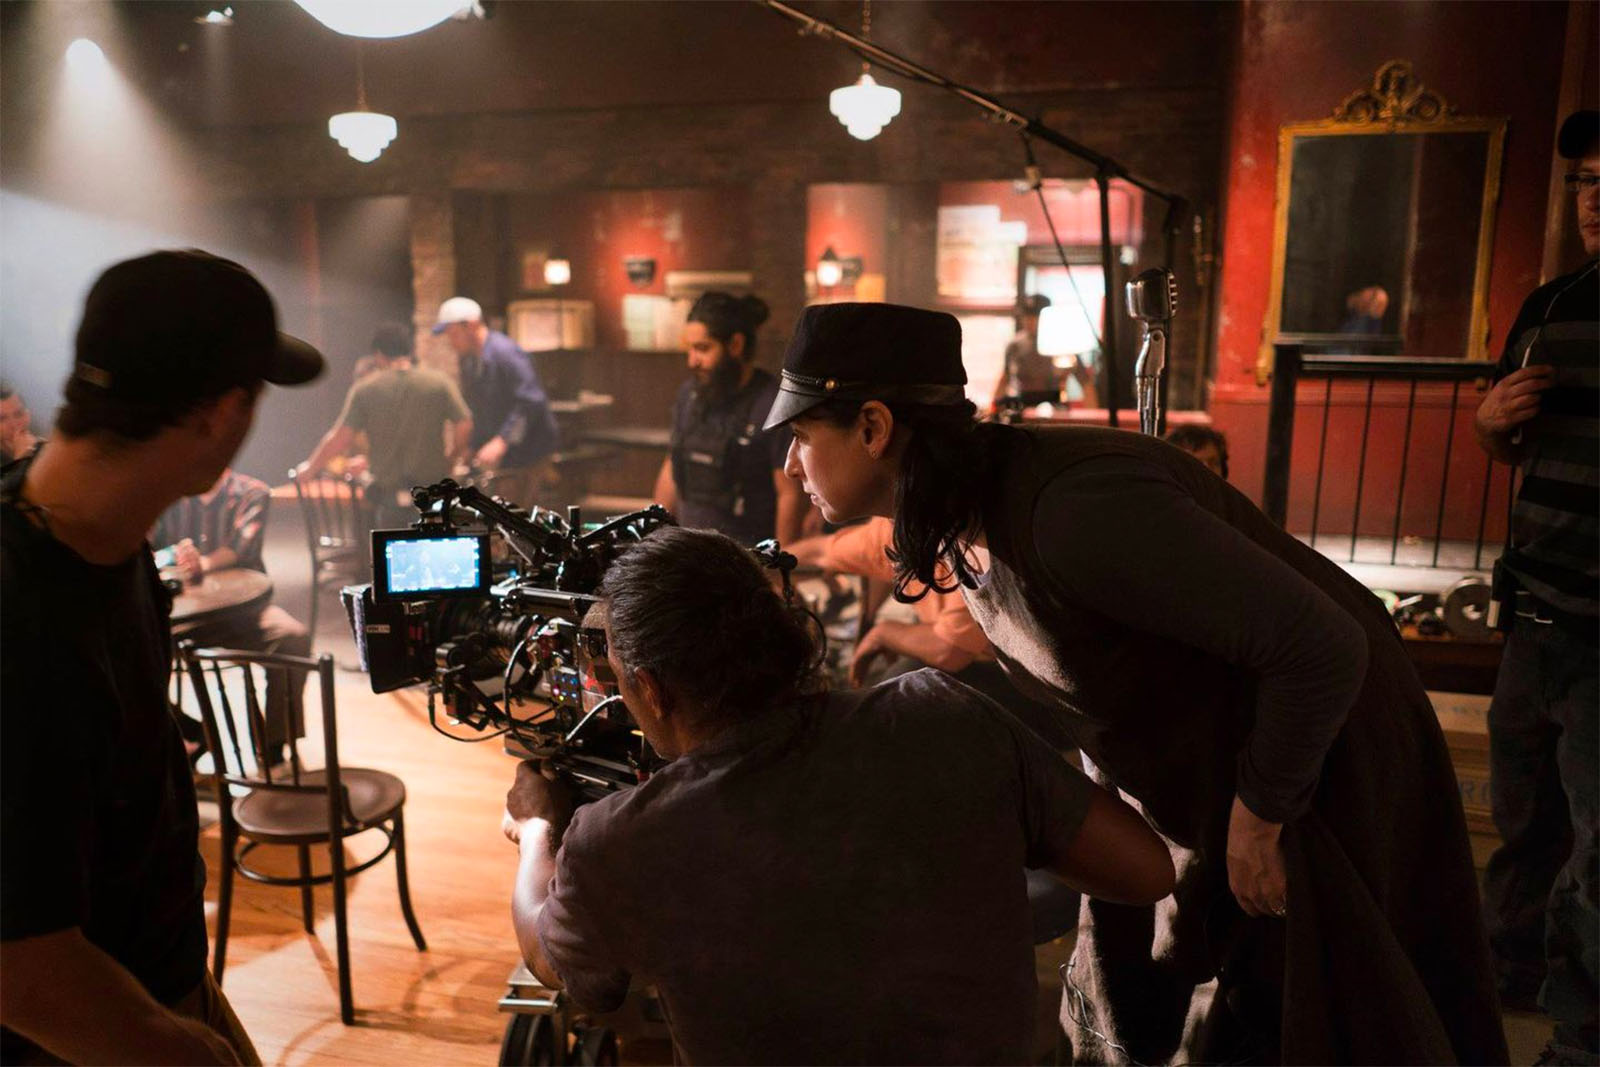 The eyeline convention is over. Director Amy Sherman-Palladino sets up a shot for The Marvelous Mrs. Maisel. Image © Amazon Studios